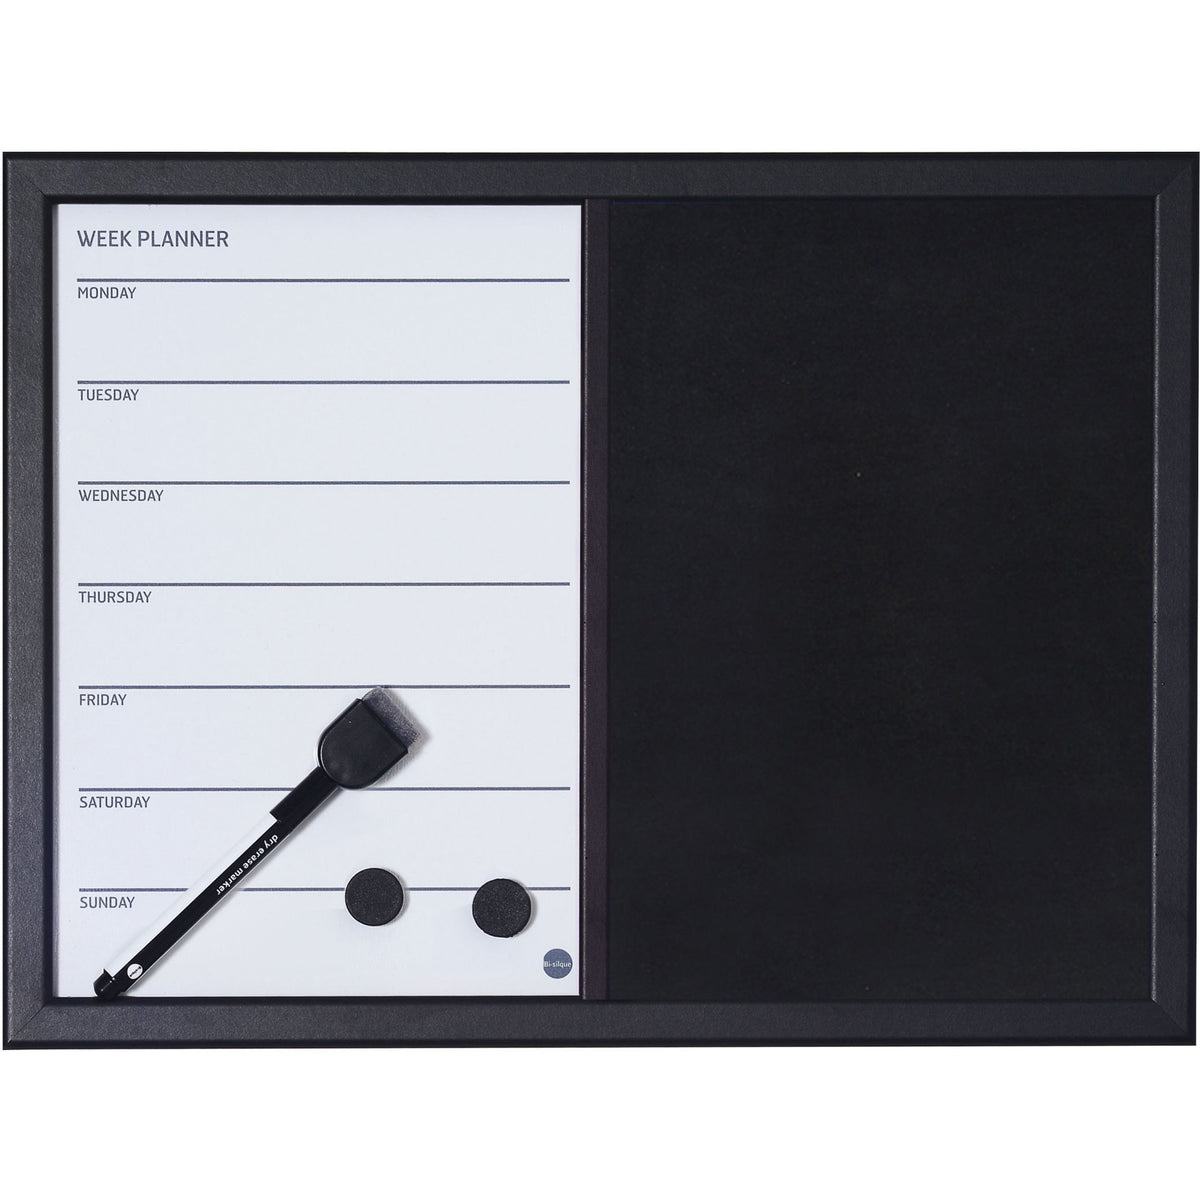 MX04445161 Weekly Planner Magnetic Dry Erase White Board Black Felt Push Pin Bulletin Board Combo, 18" x 24", Black Frame by MasterVision